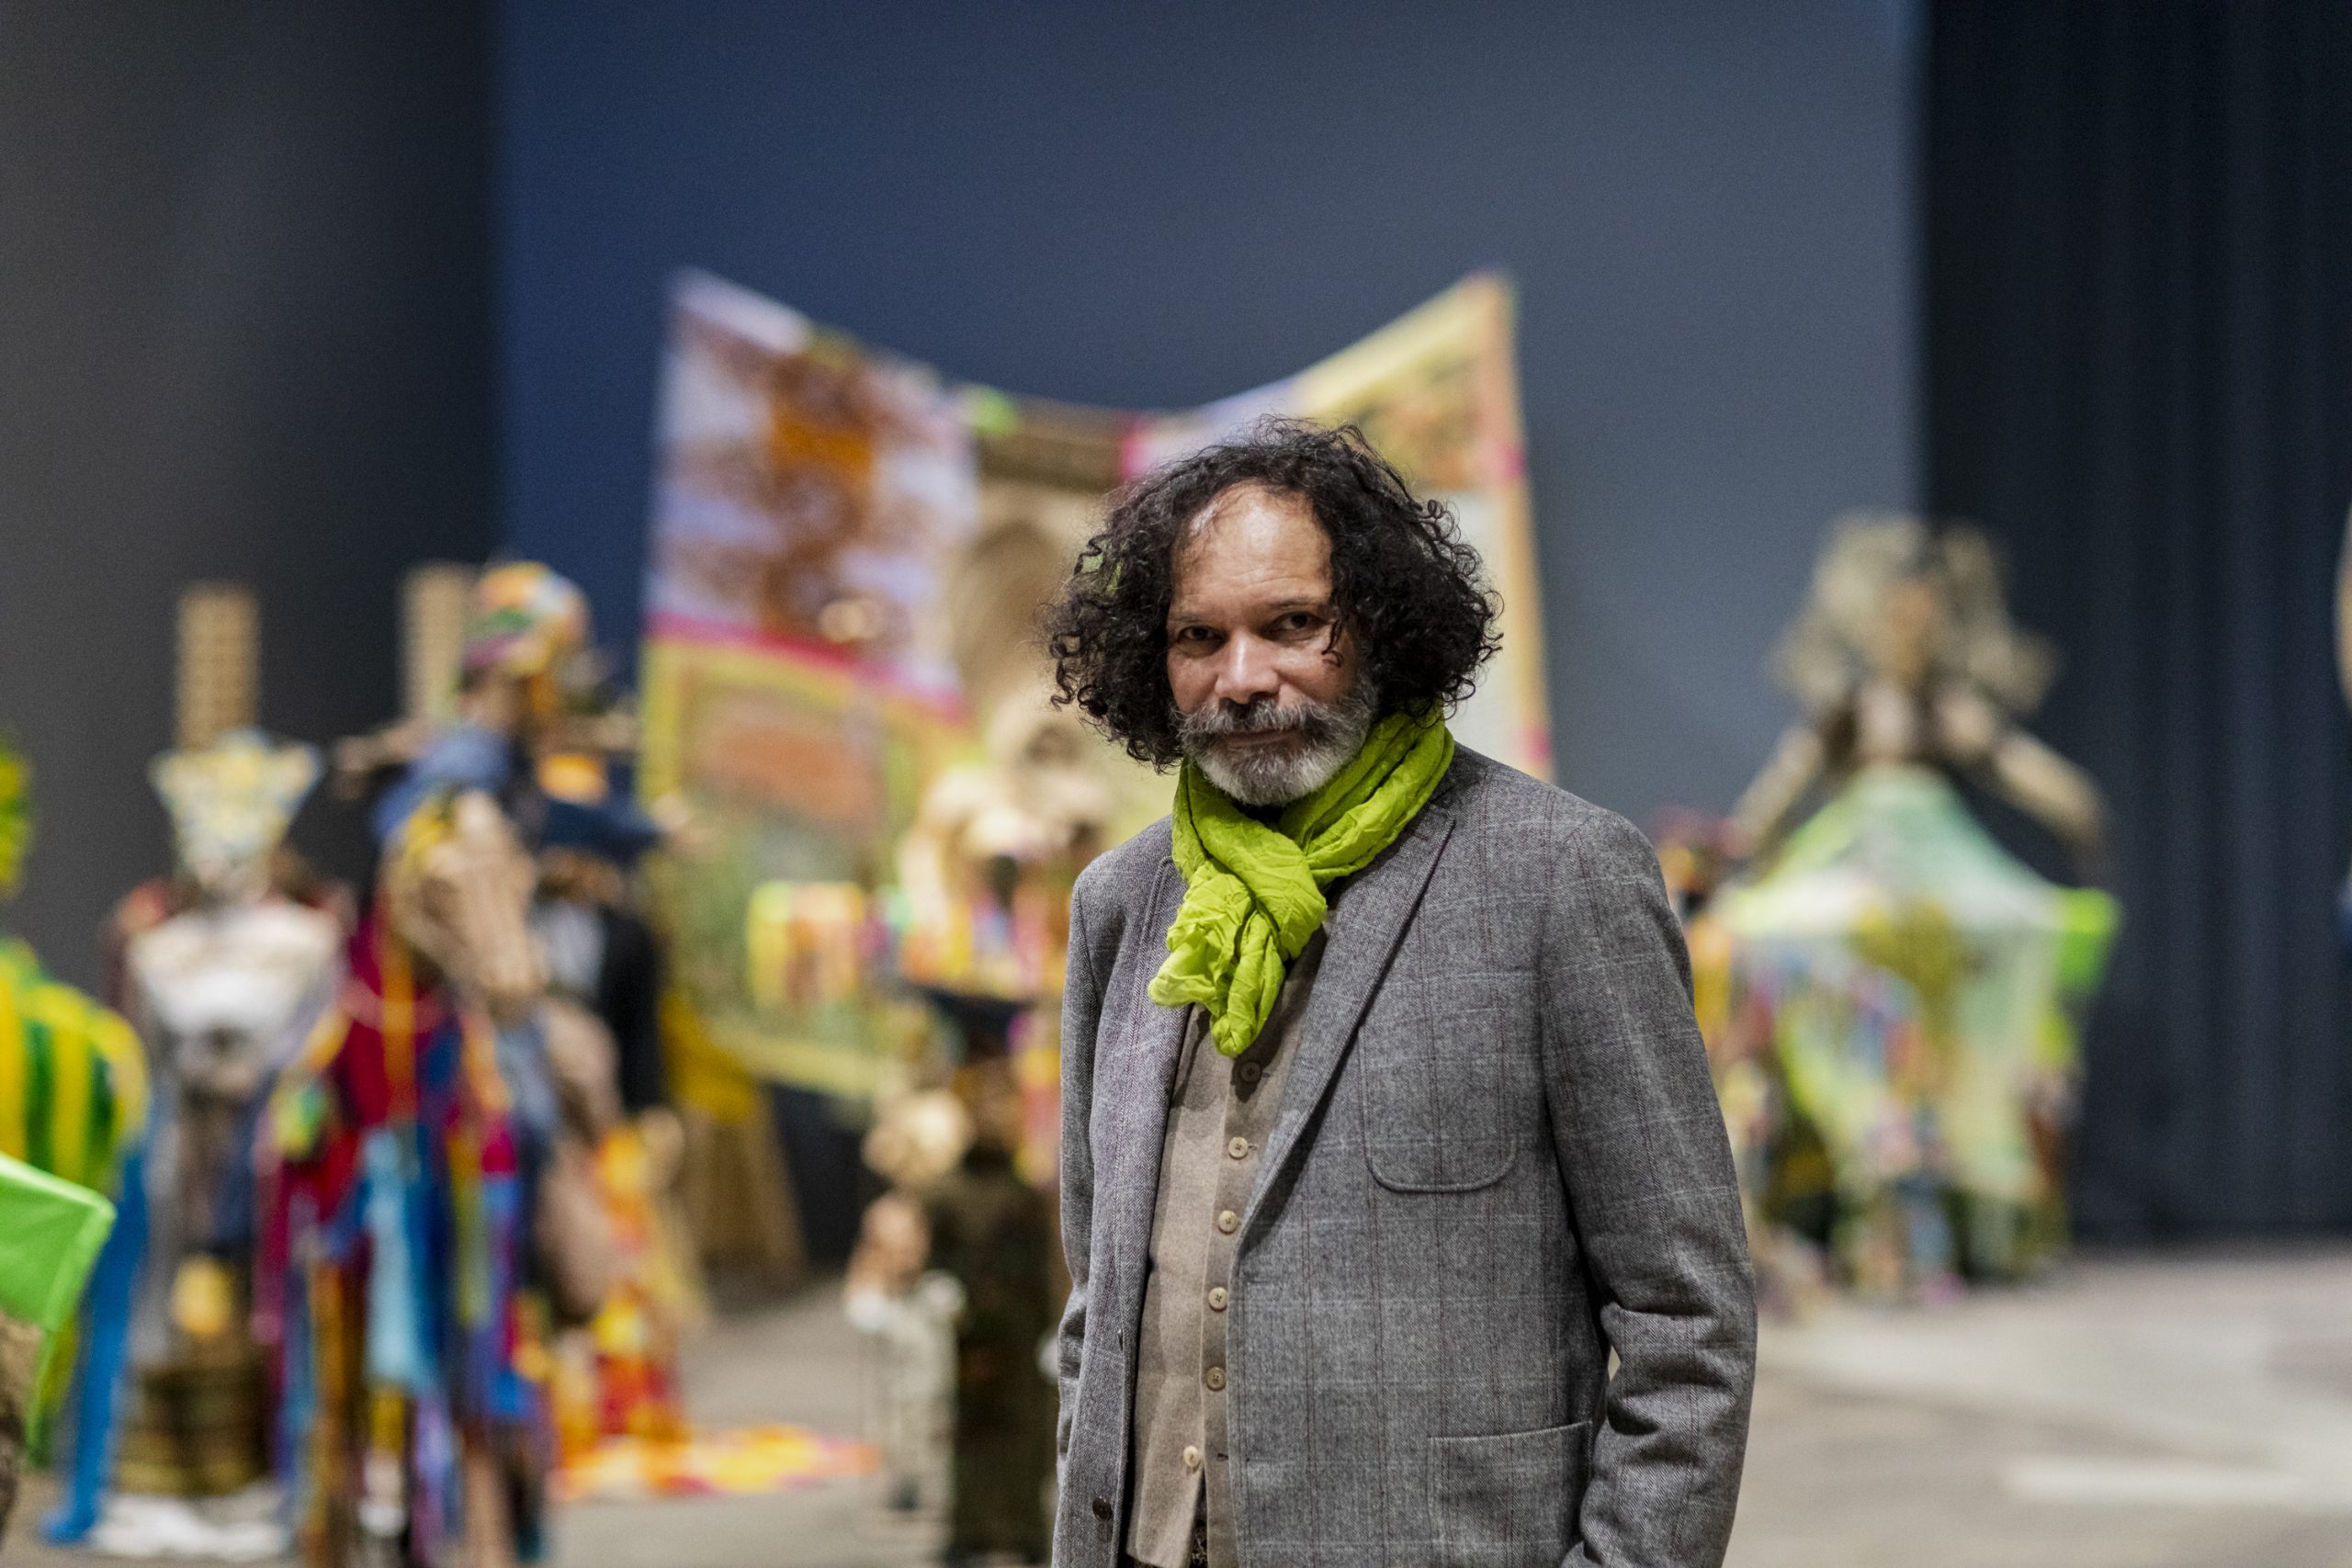 A older person with curly dark hair and white beard stands in front of sculptures out of focus